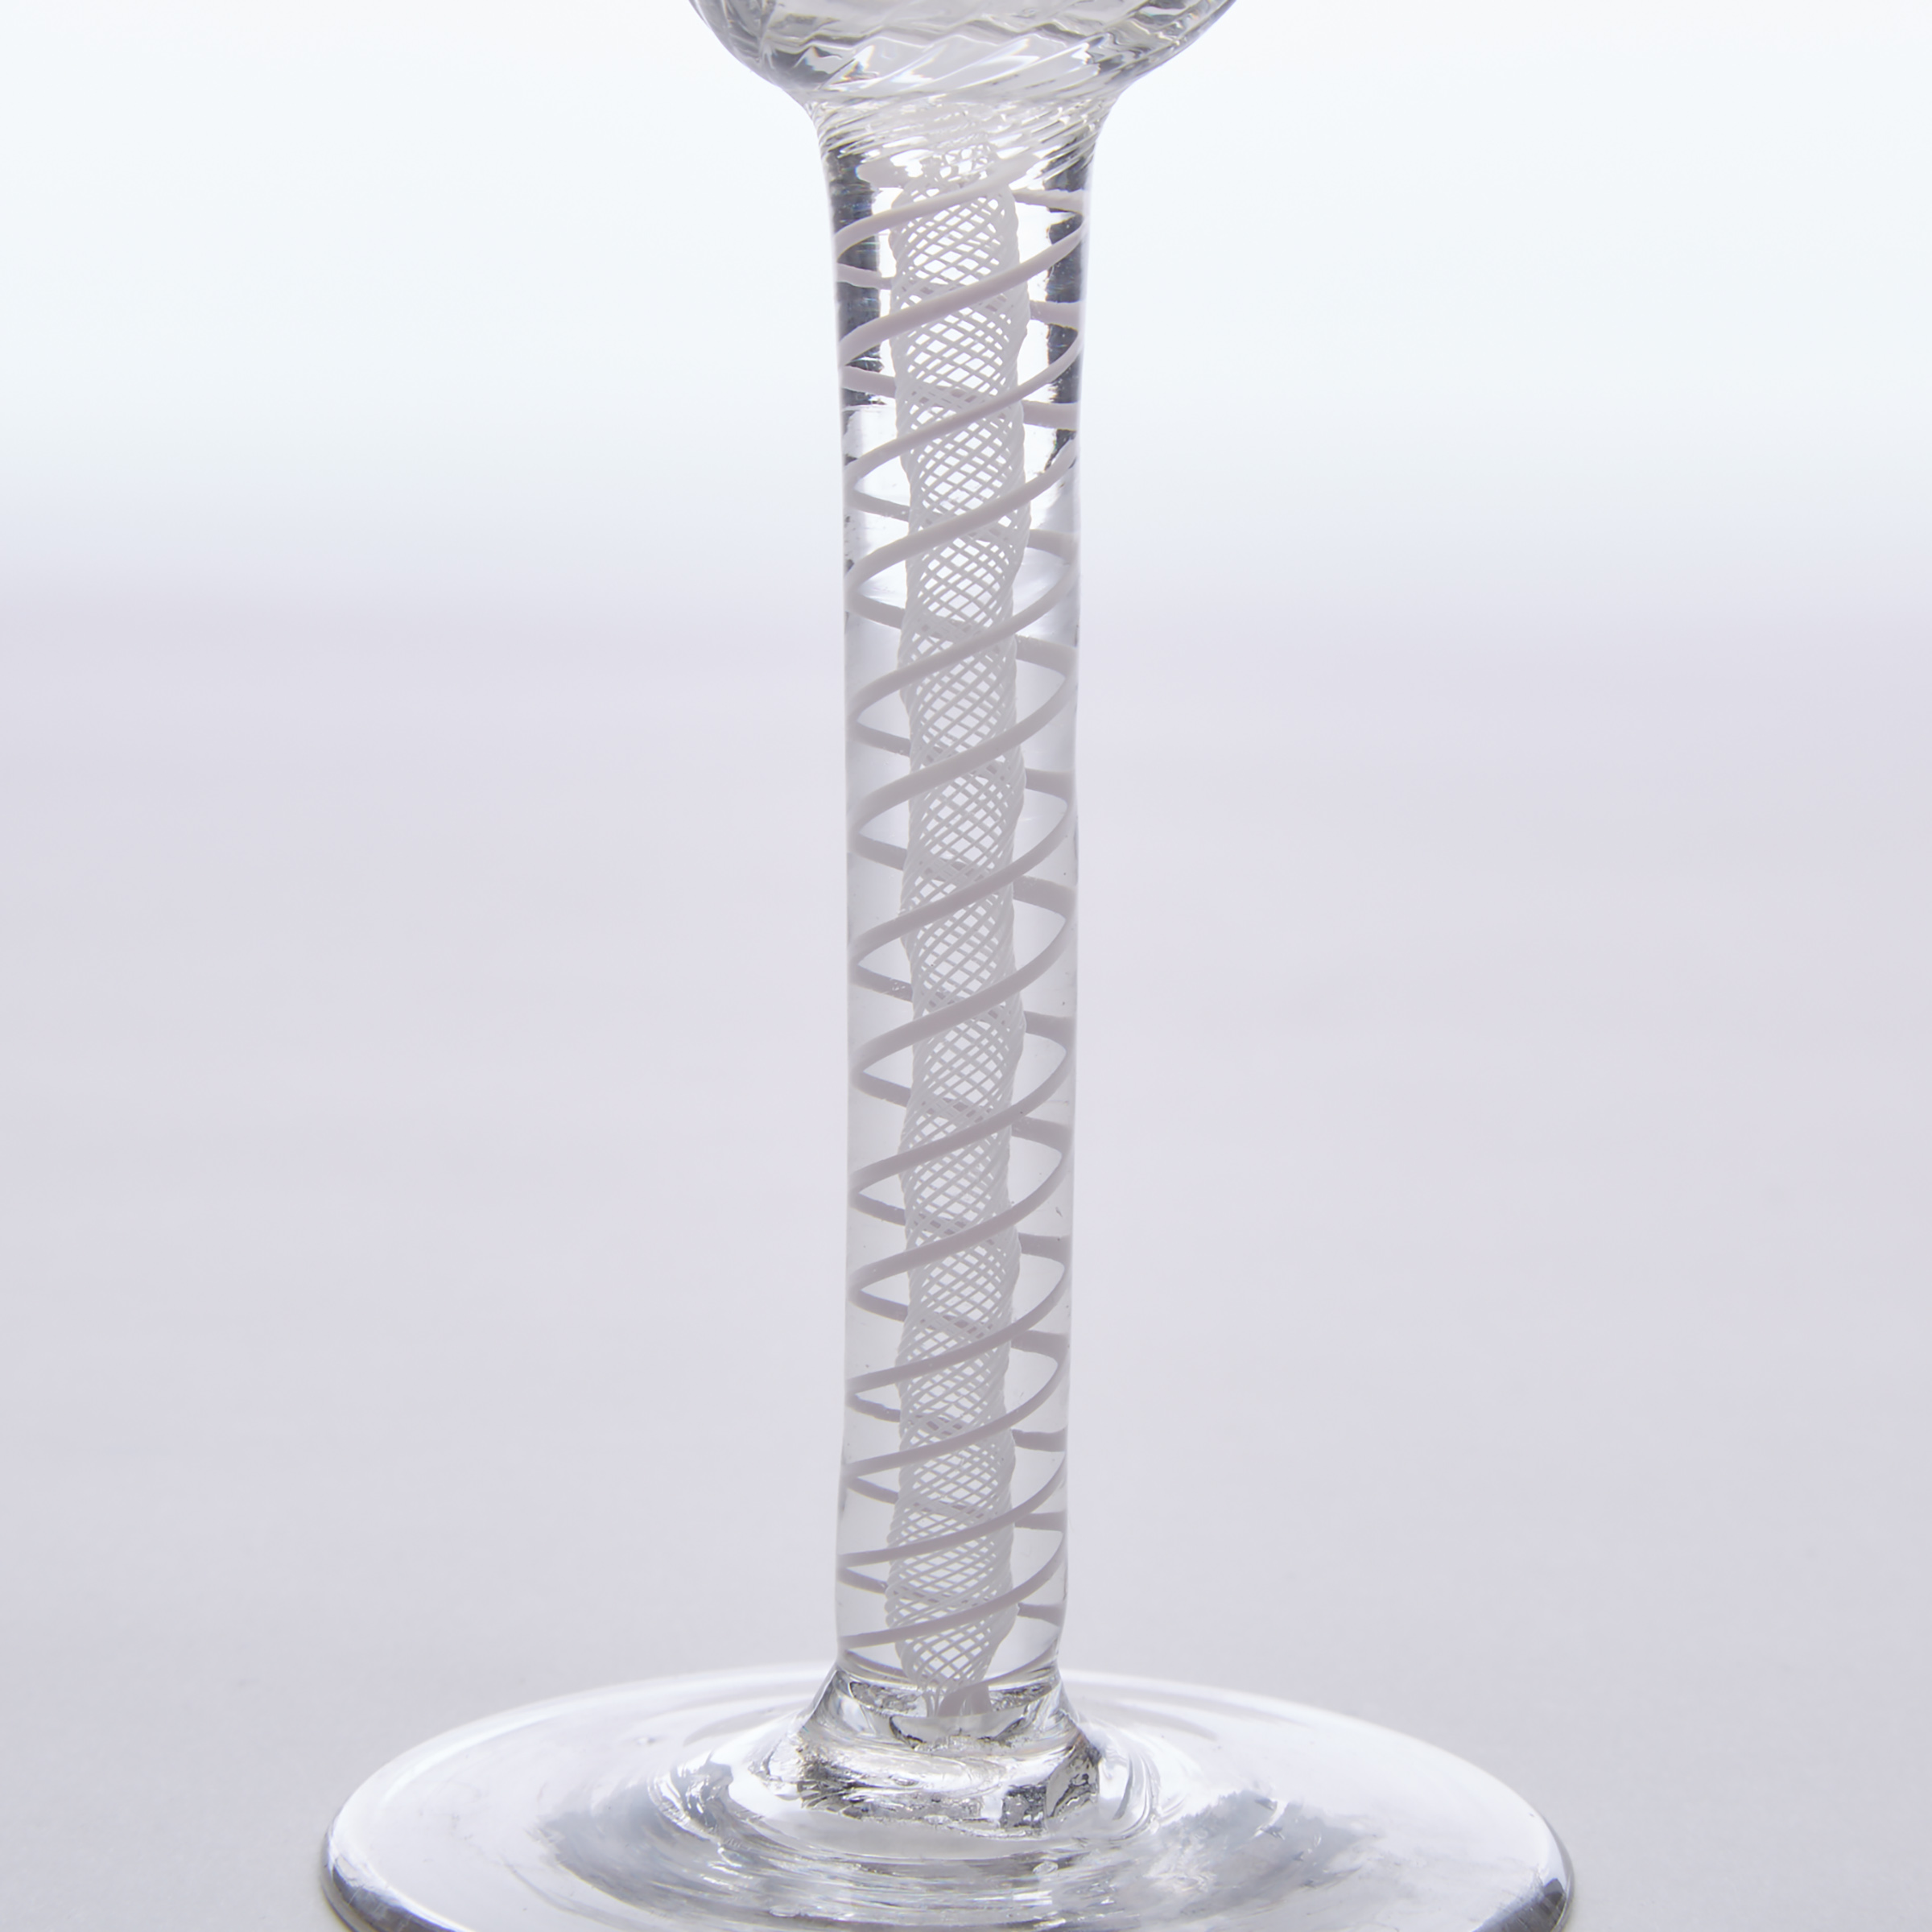 English Engraved Opaque Twist Stemmed Wine Glass, c.1760-80